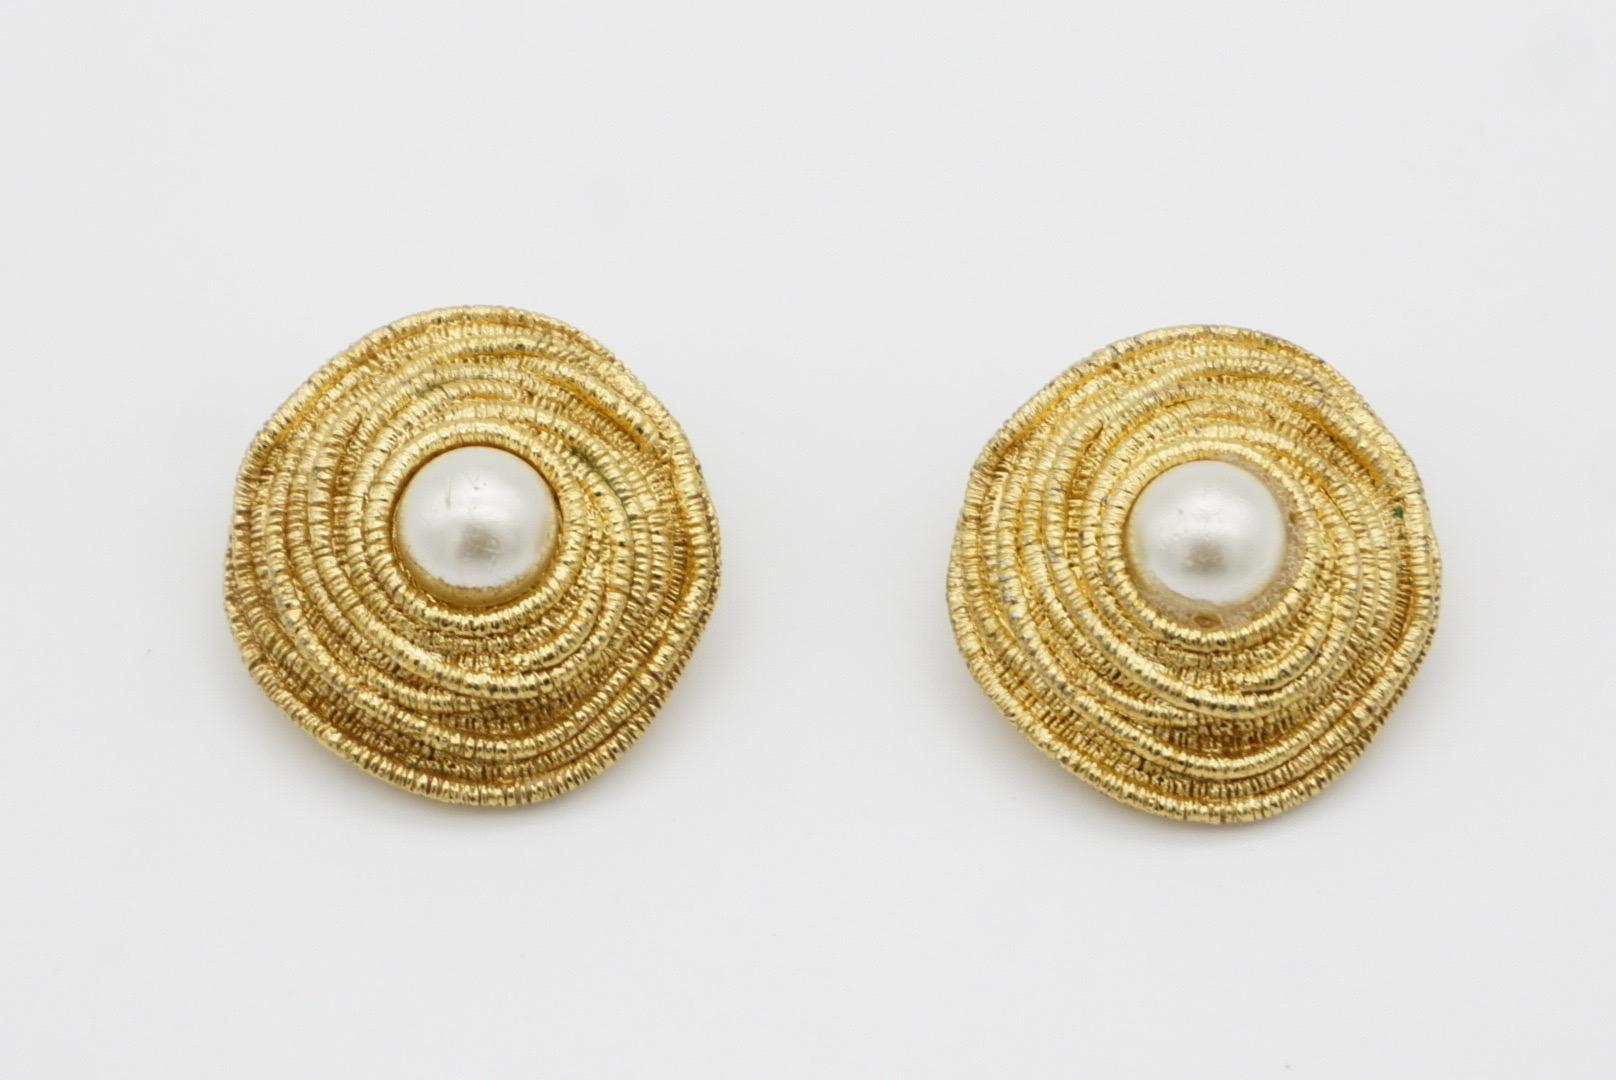 Christian Dior Vintage 1980s Irregular Spiral Round Circle Pearl Clip Earrings For Sale 6